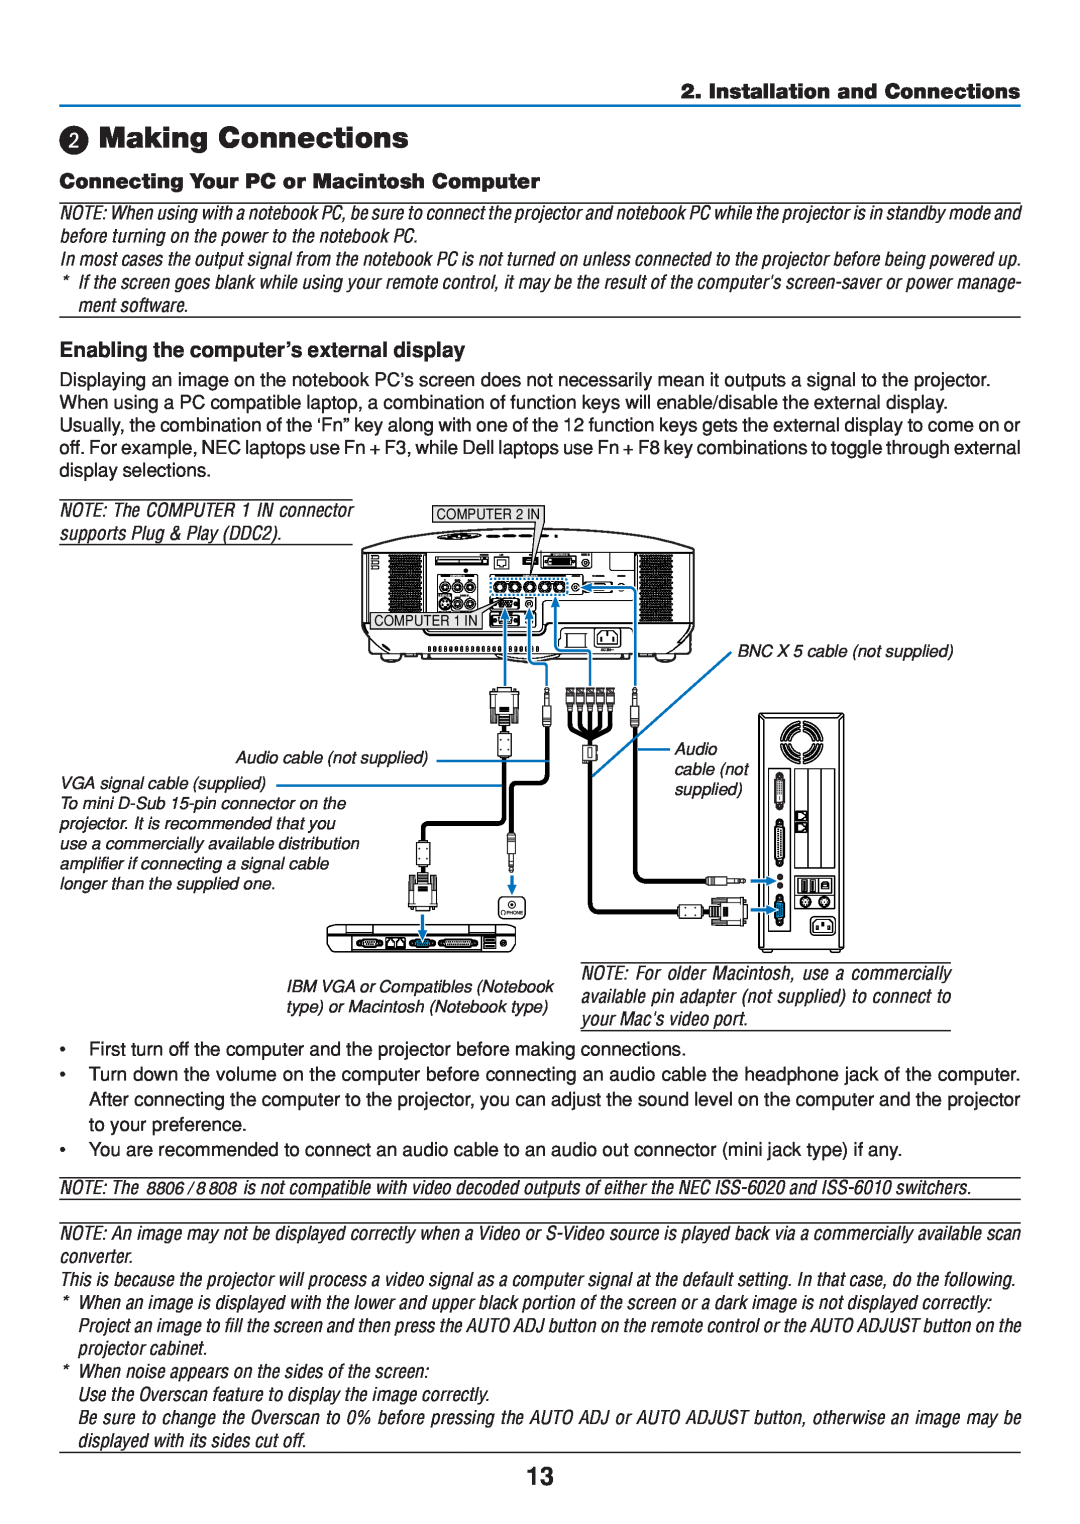 Dukane 8808 user manual Making Connections, Installation and Connections, Connecting Your PC or Macintosh Computer 